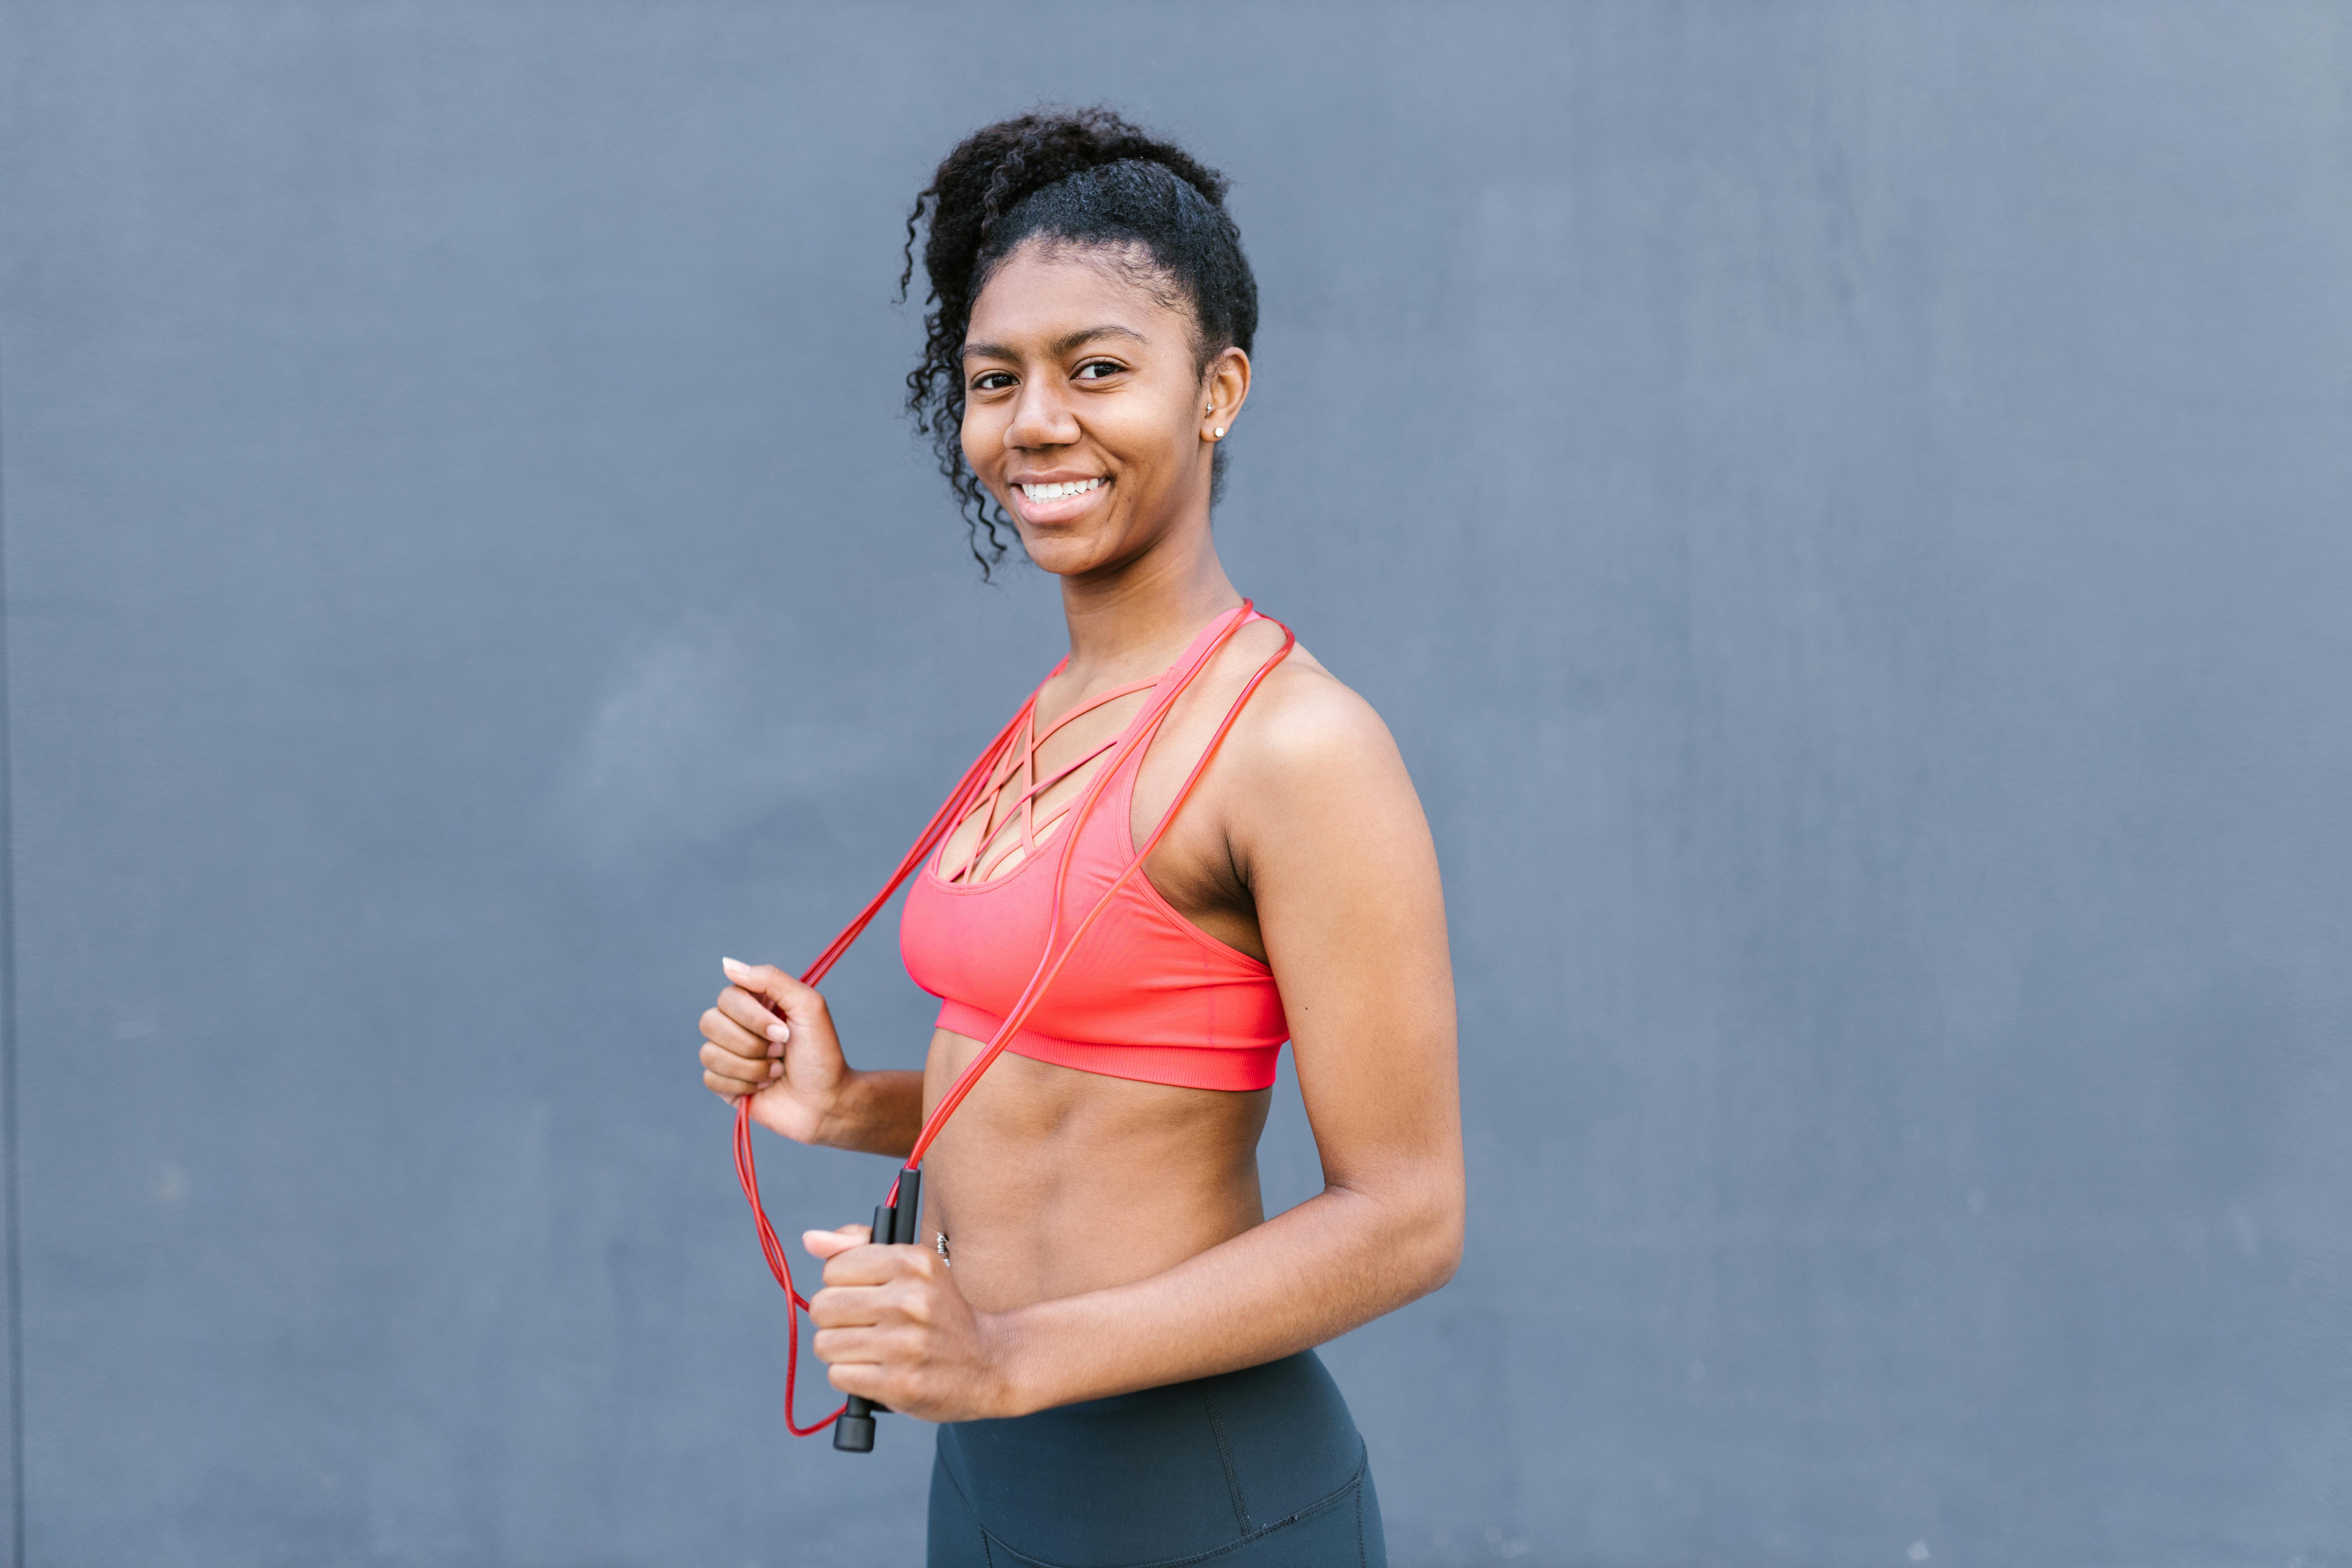 Free: Photo of Woman in Red Sports Bra 